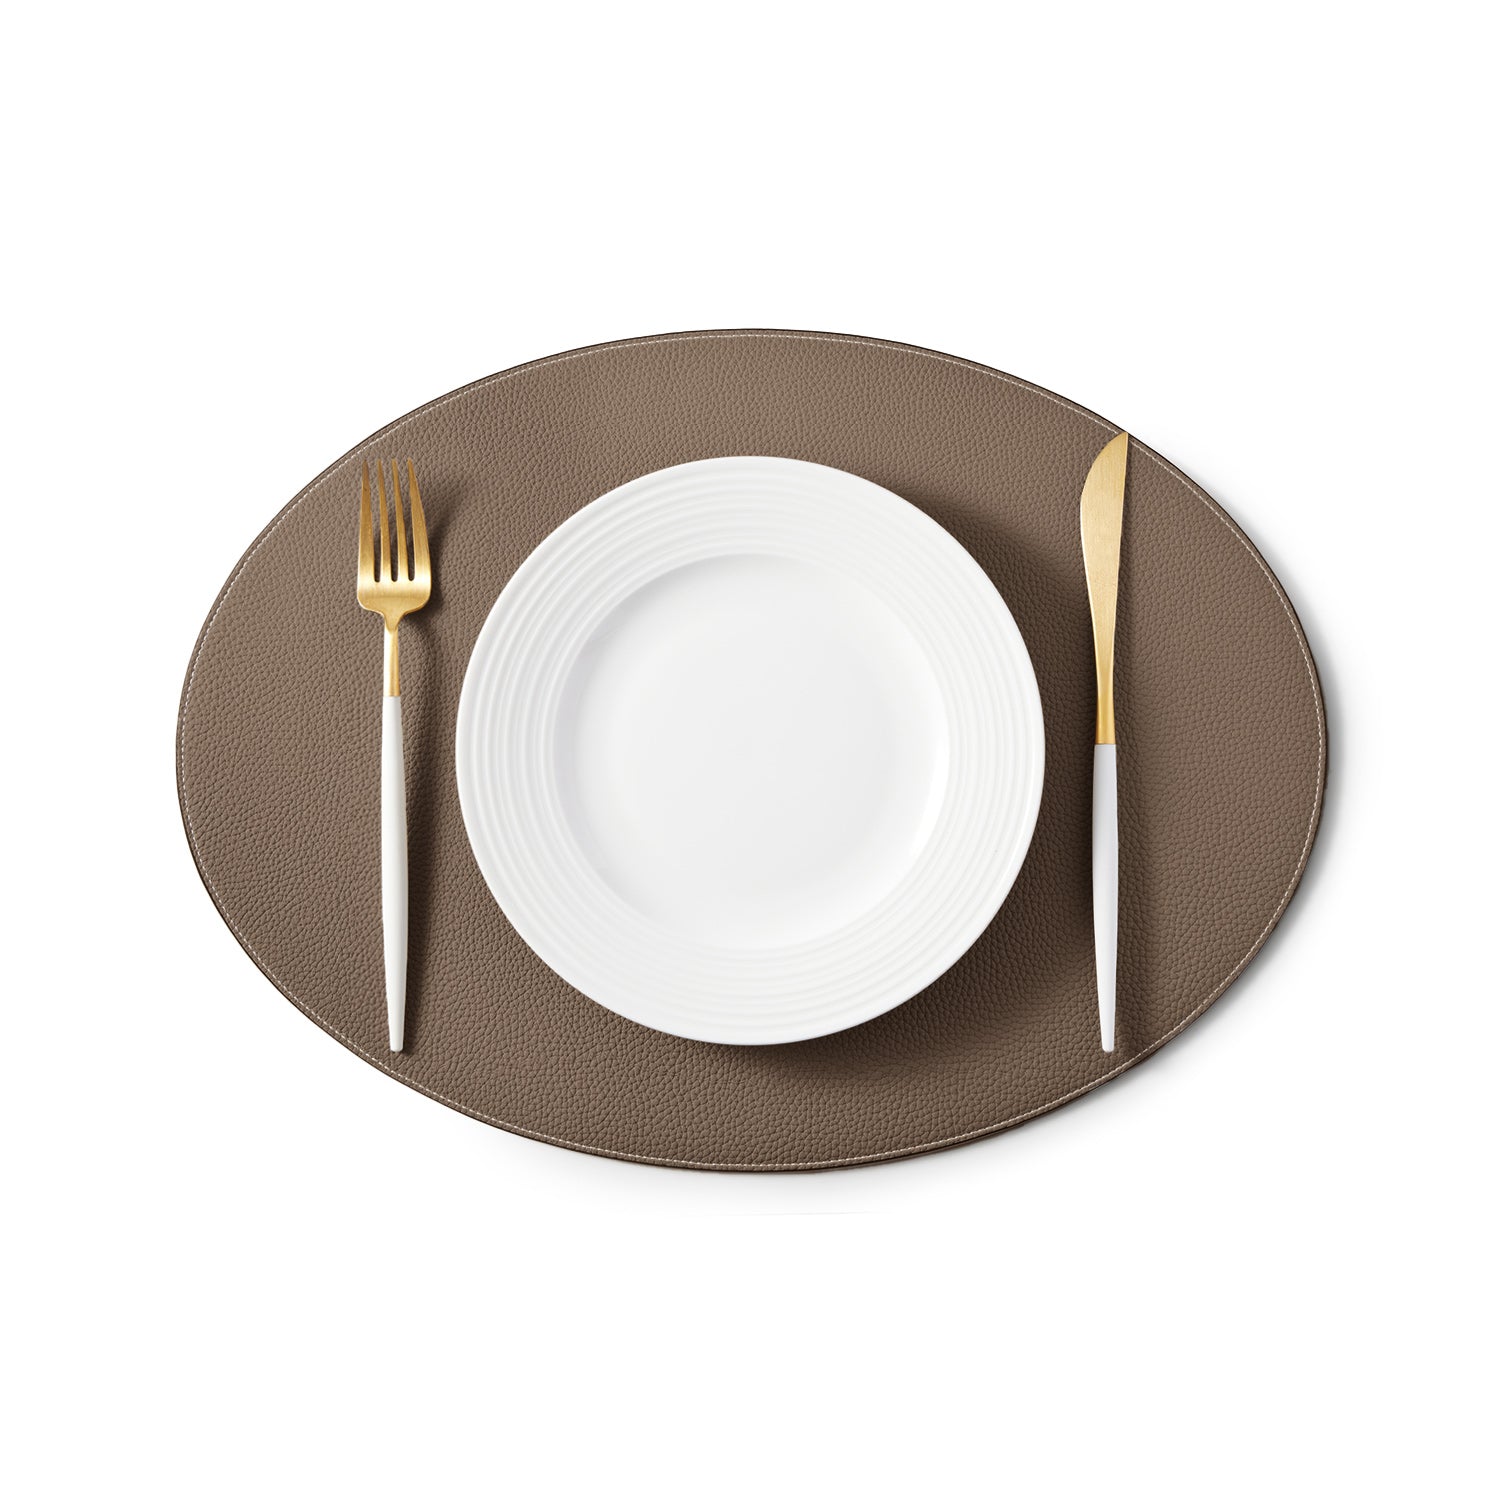 Placemat (round) in shrink leather